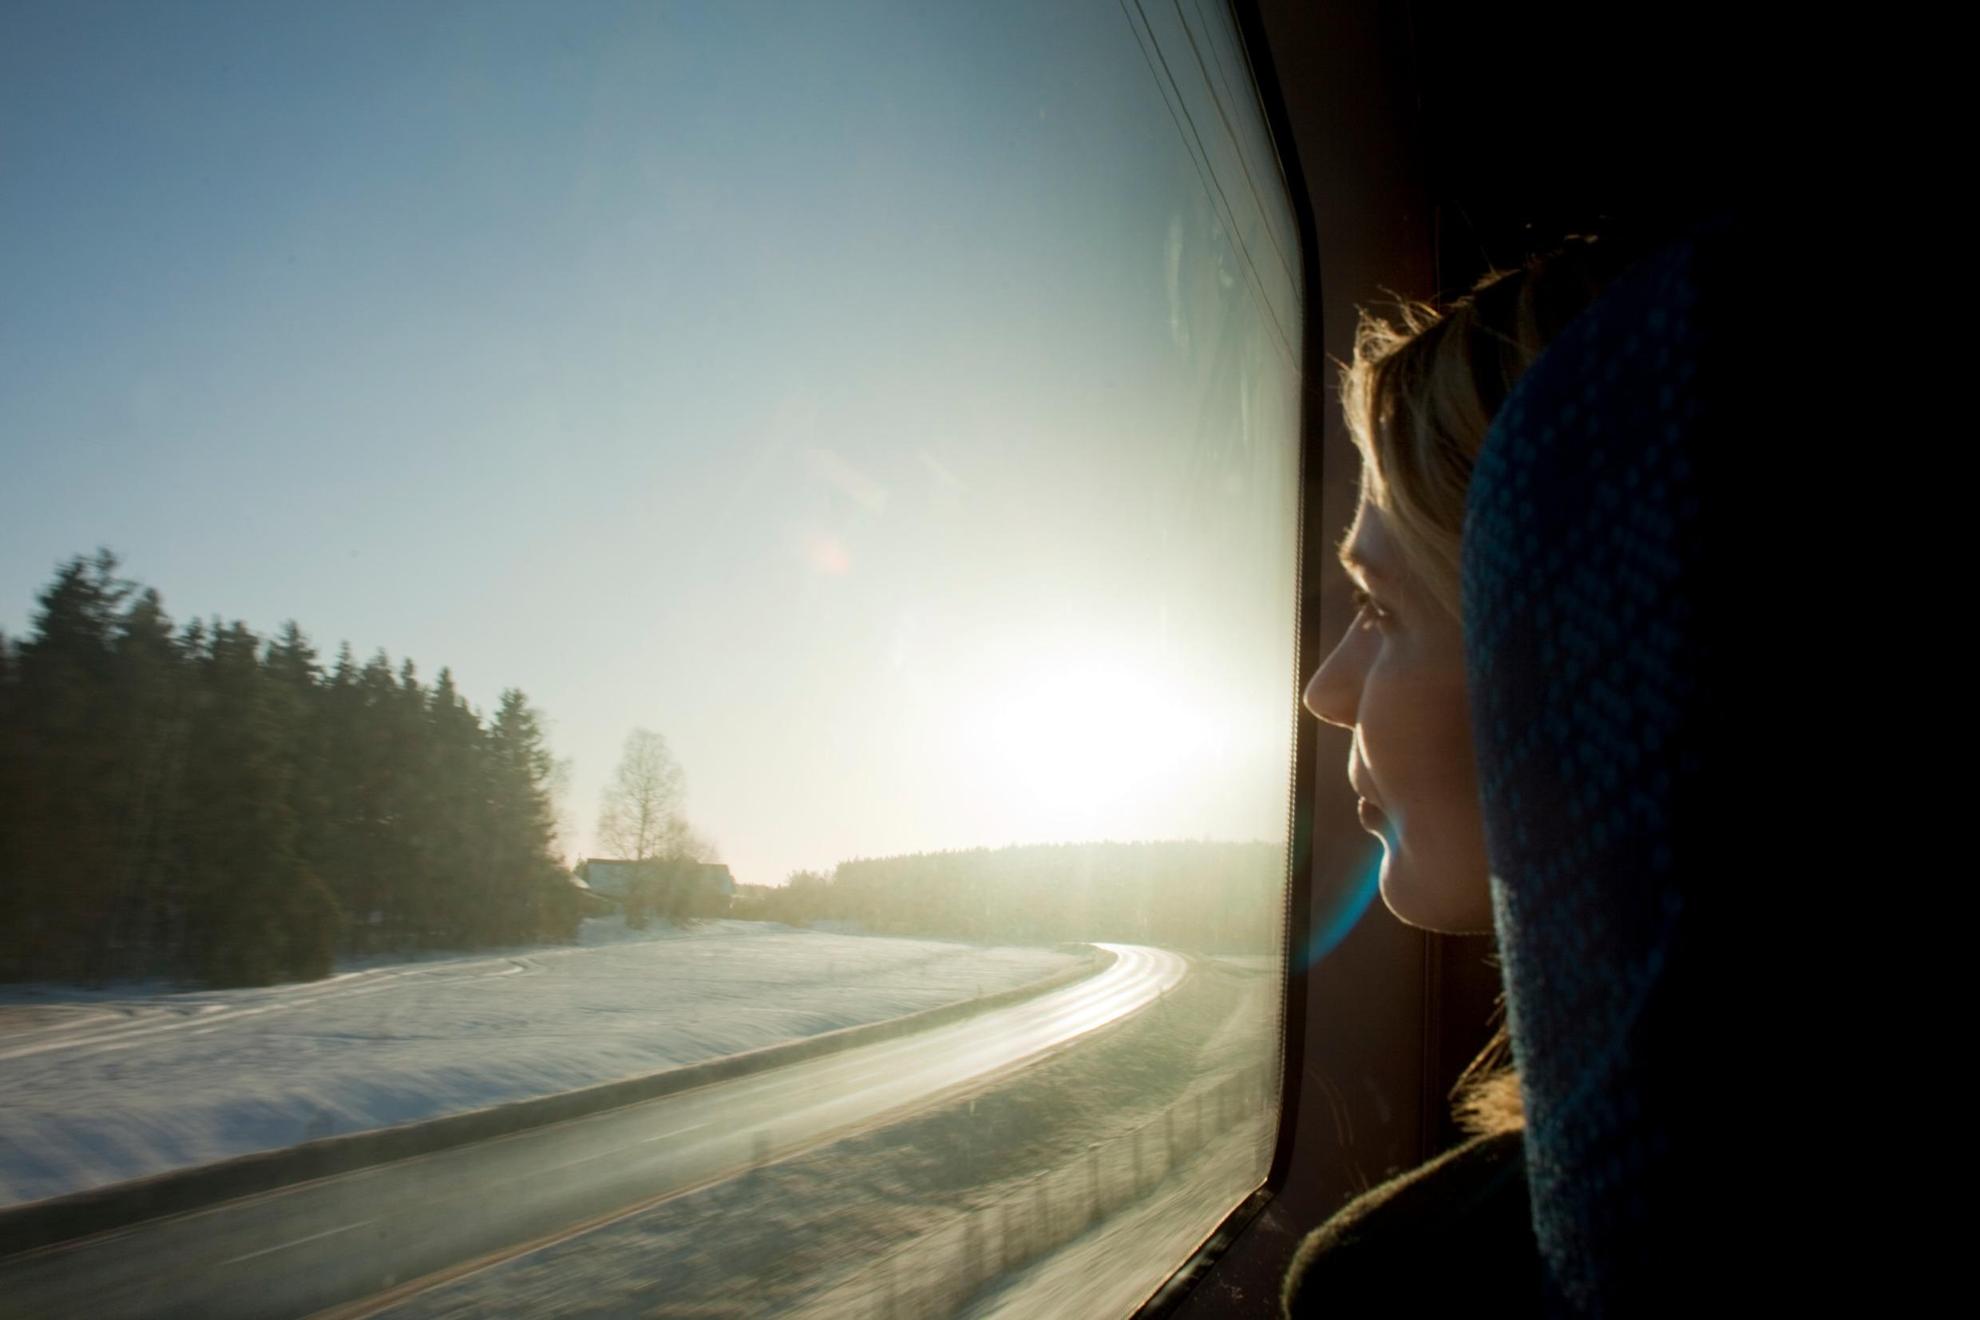 A woman looking at a snowy forest landscape through a train window.